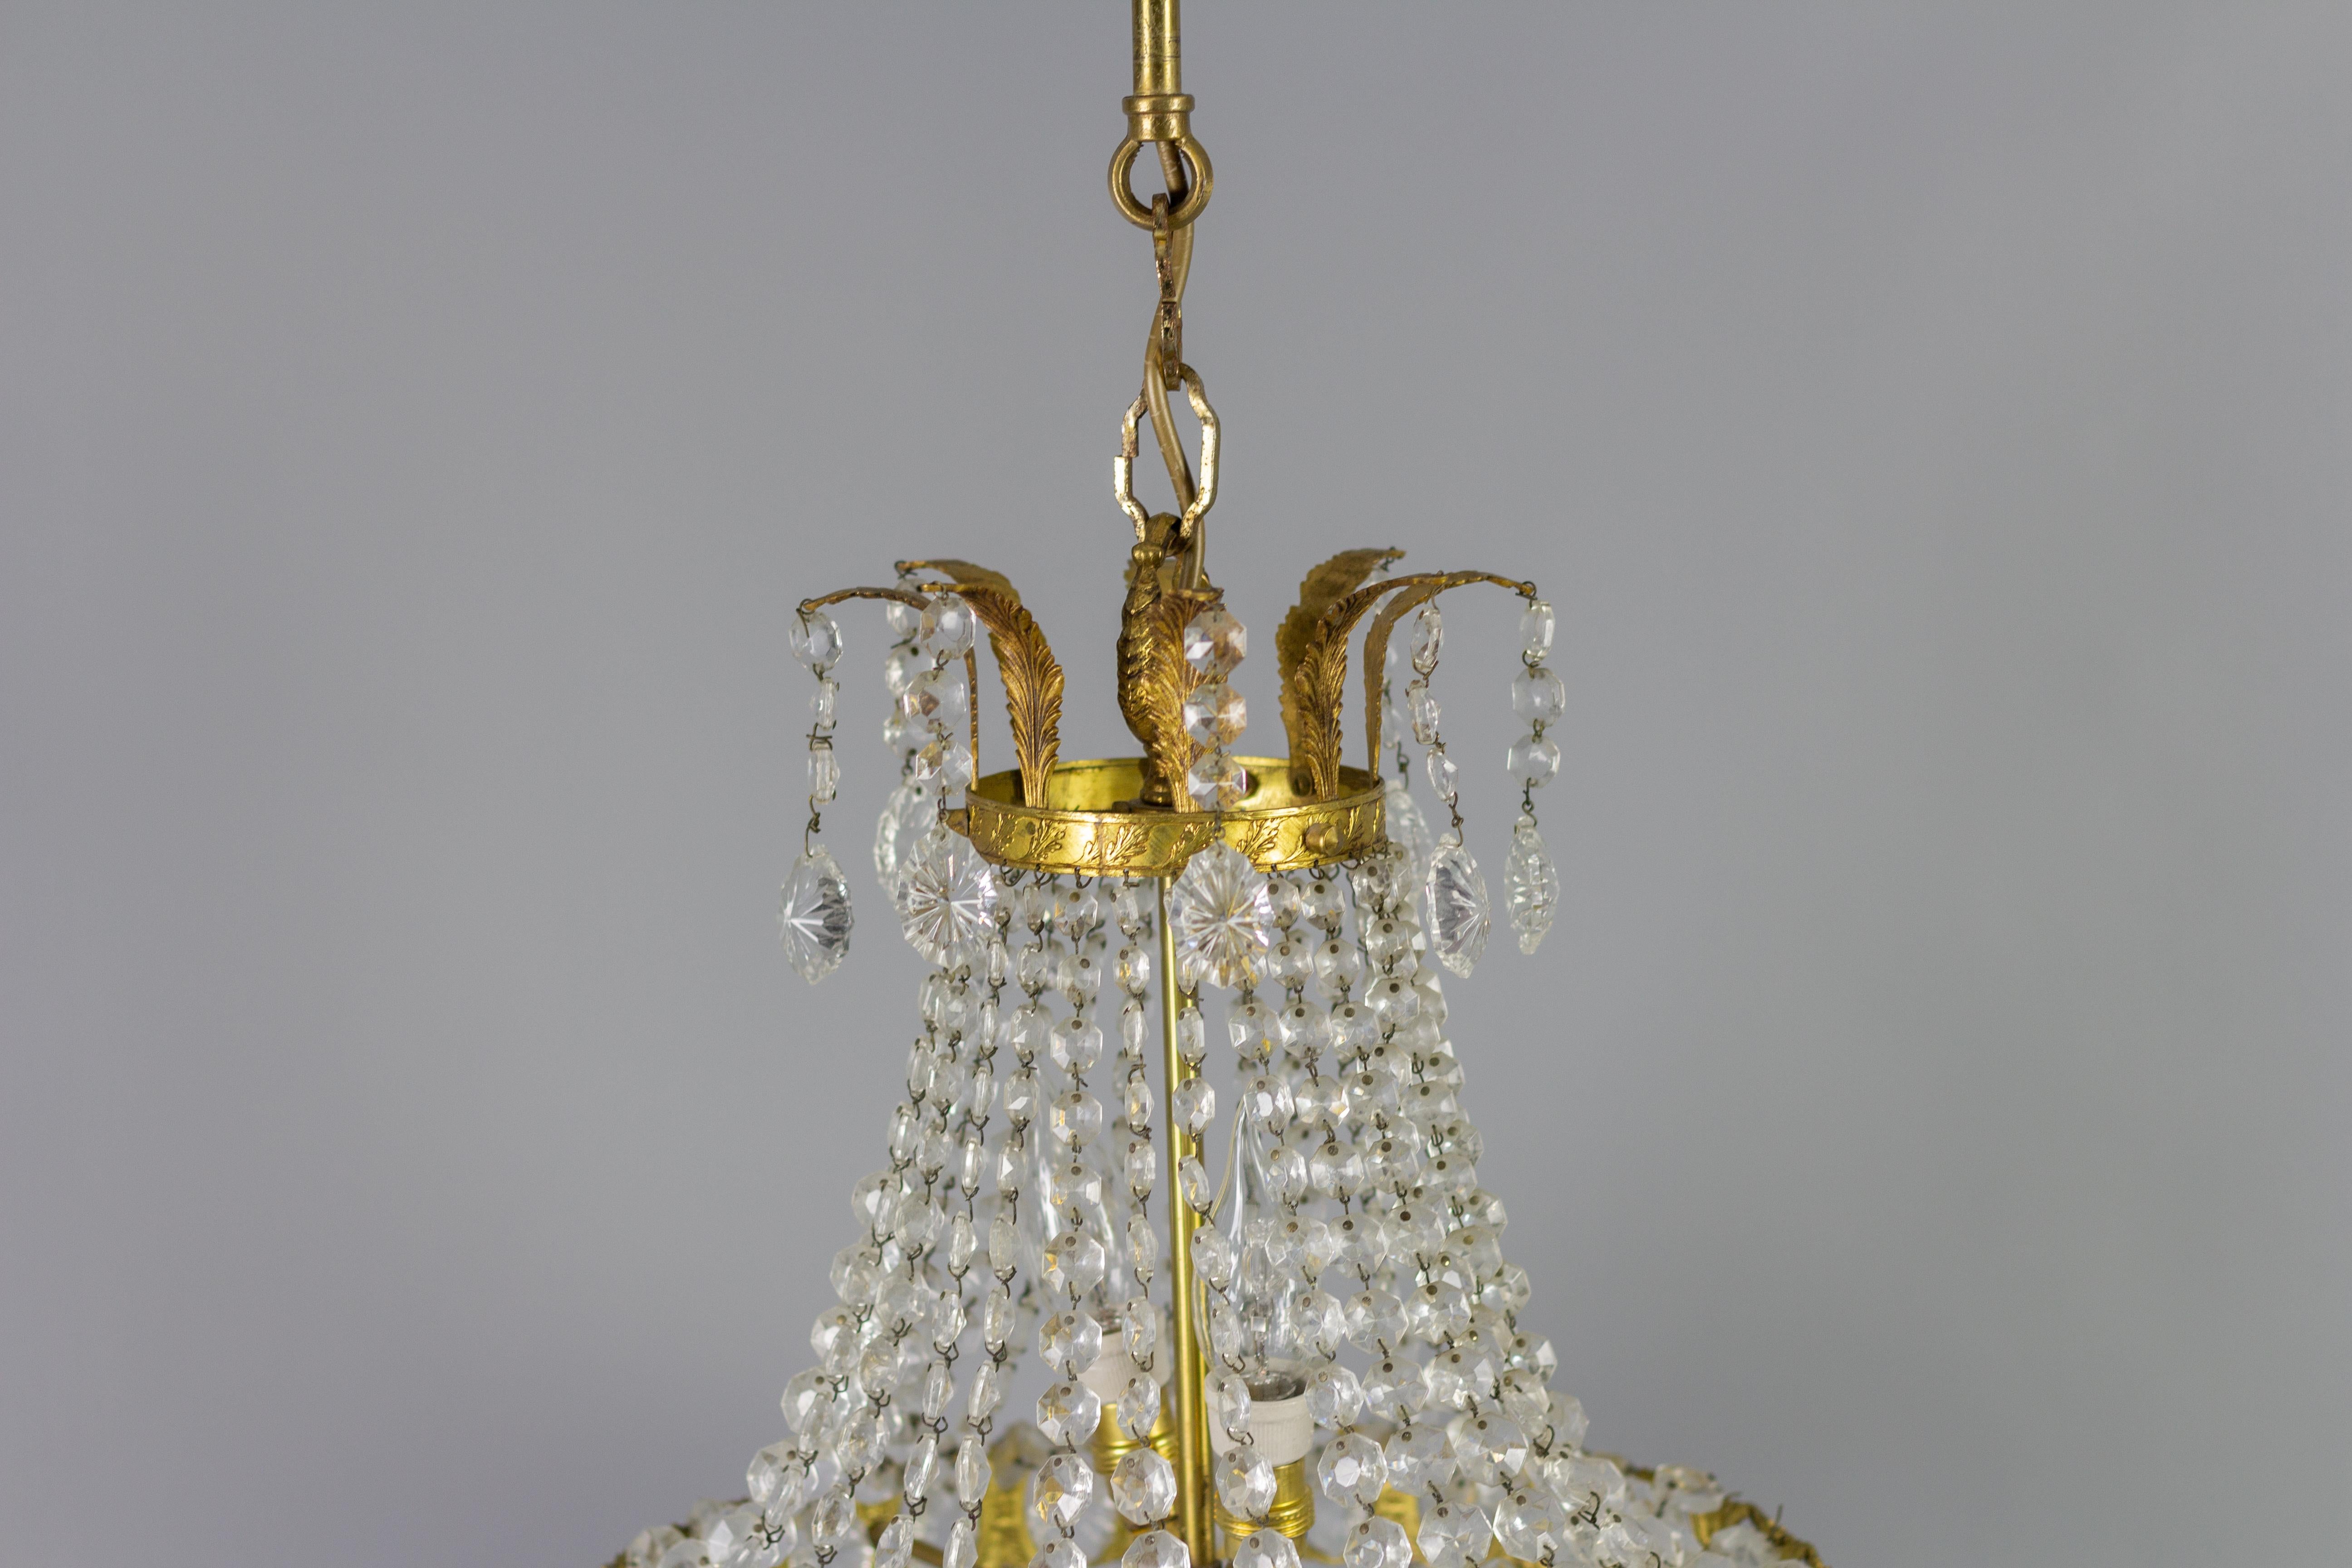 French Empire Style Crystal Glass and Four-Light Basket-Shaped Chandelier For Sale 7